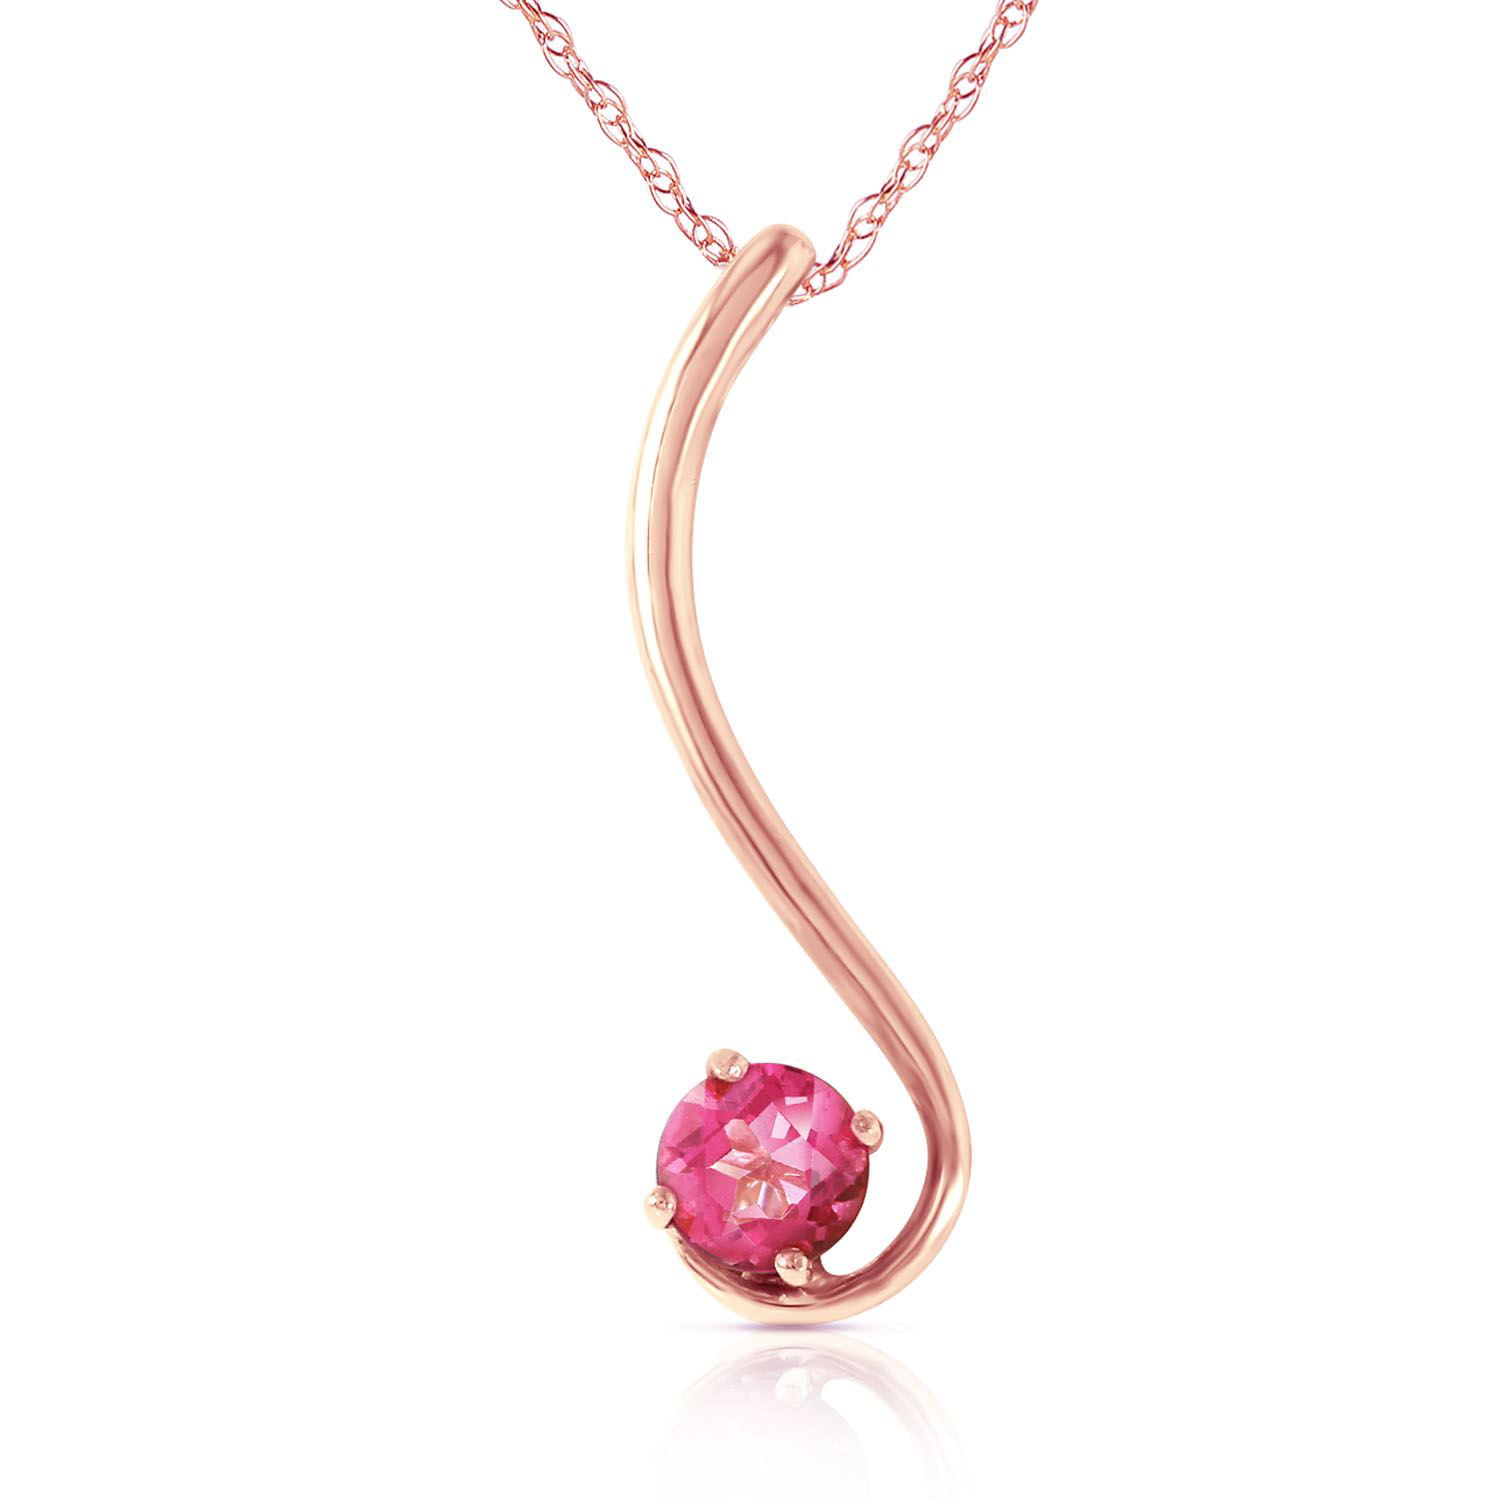 ALARRI 14K Solid Rose Gold Necklace w/ Natural Rose Topaz & Diamond with 24 Inch Chain Length 